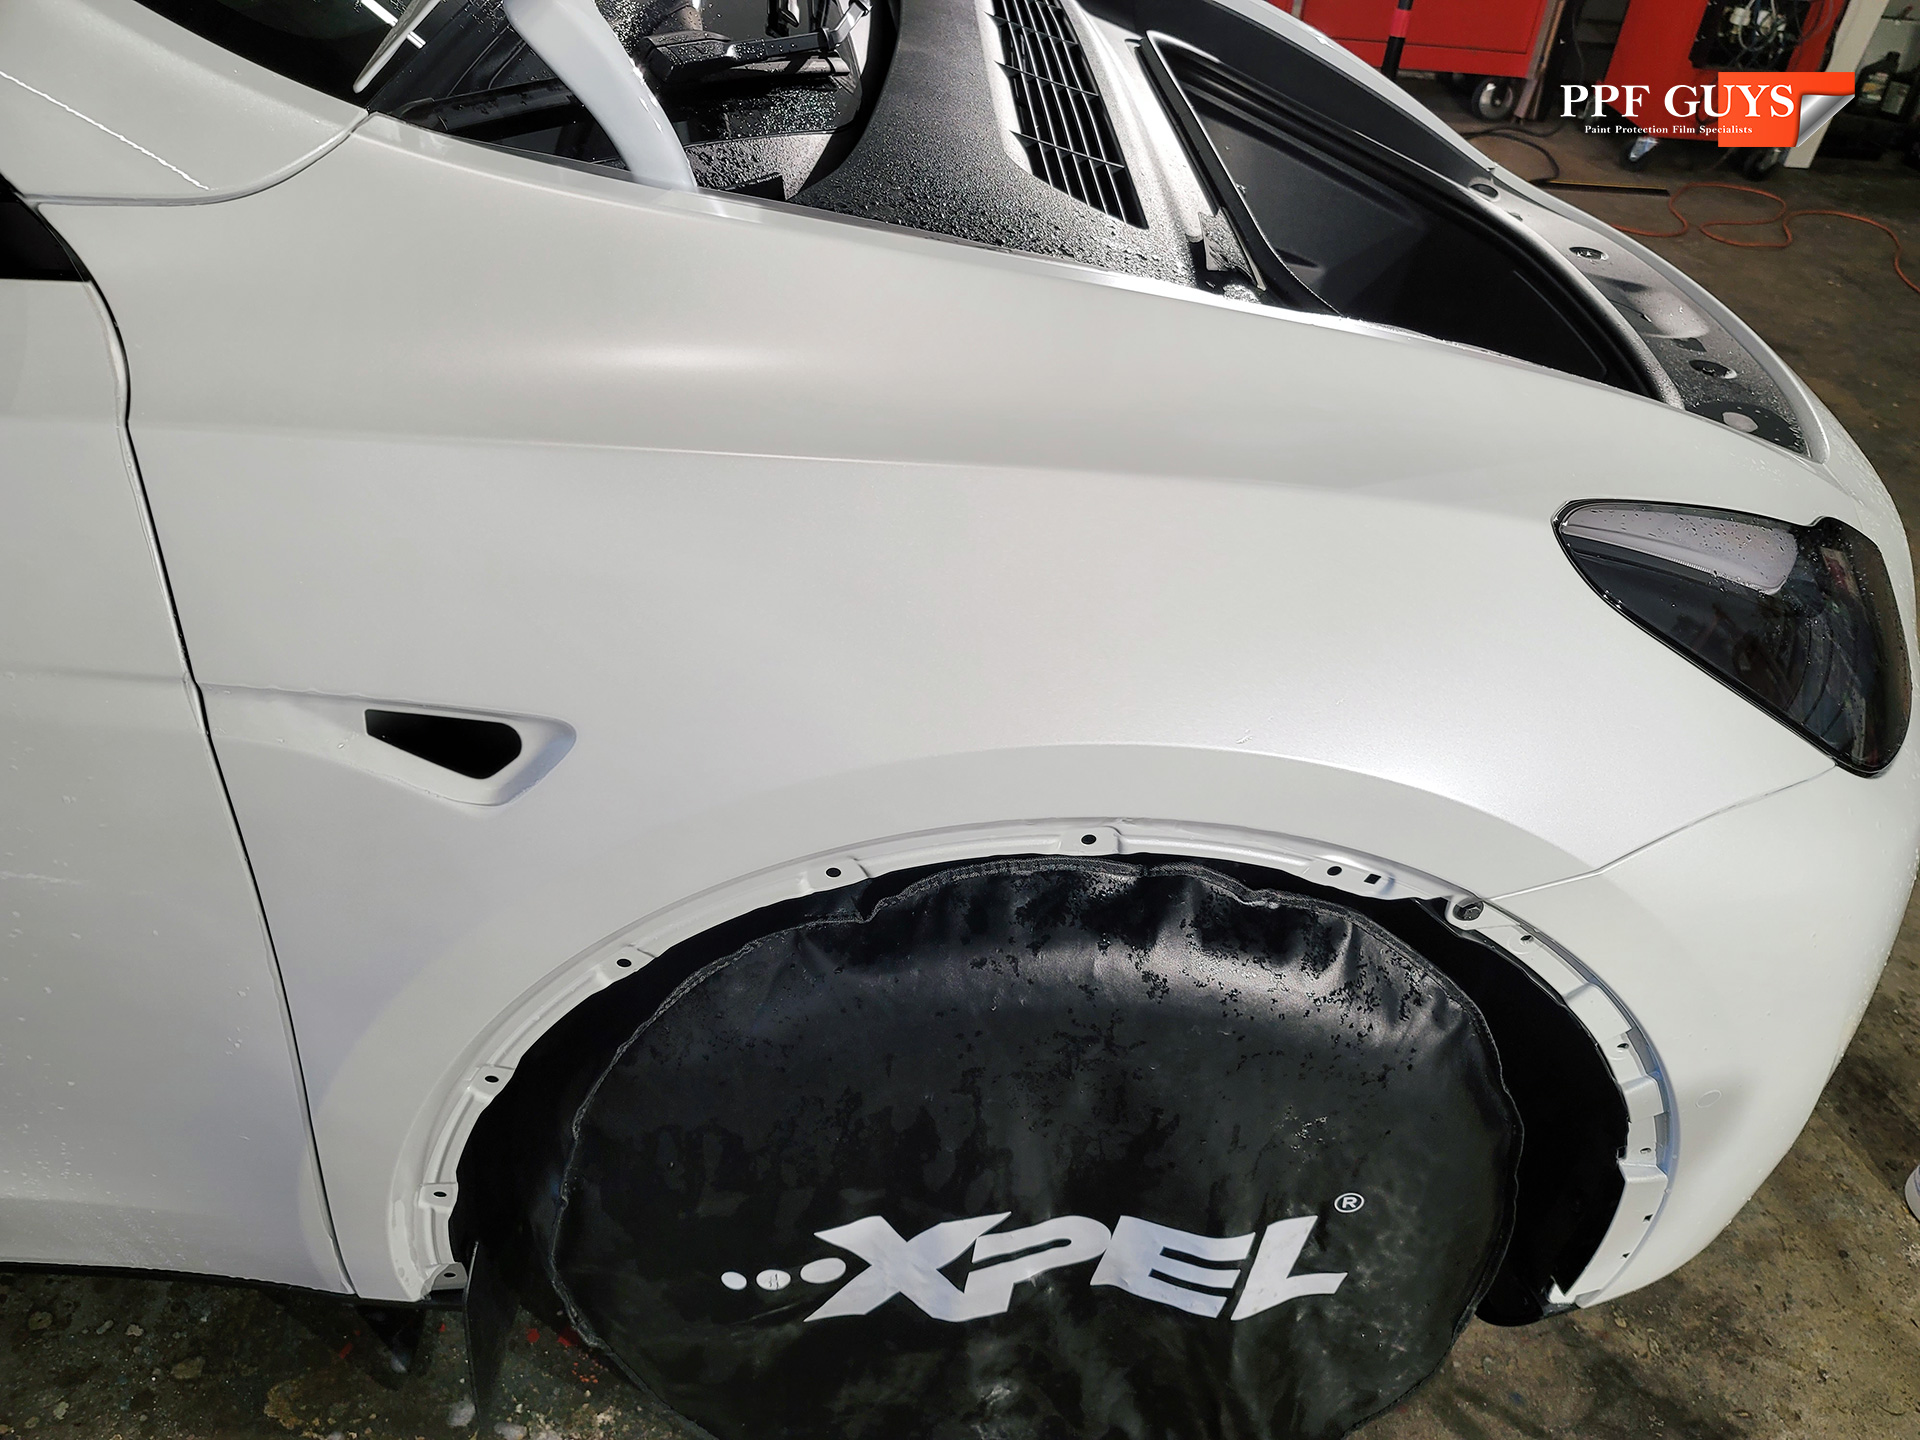 PPF Guys Model Y White Xpel Stealth, ceramic, painted emblems (11).jpg